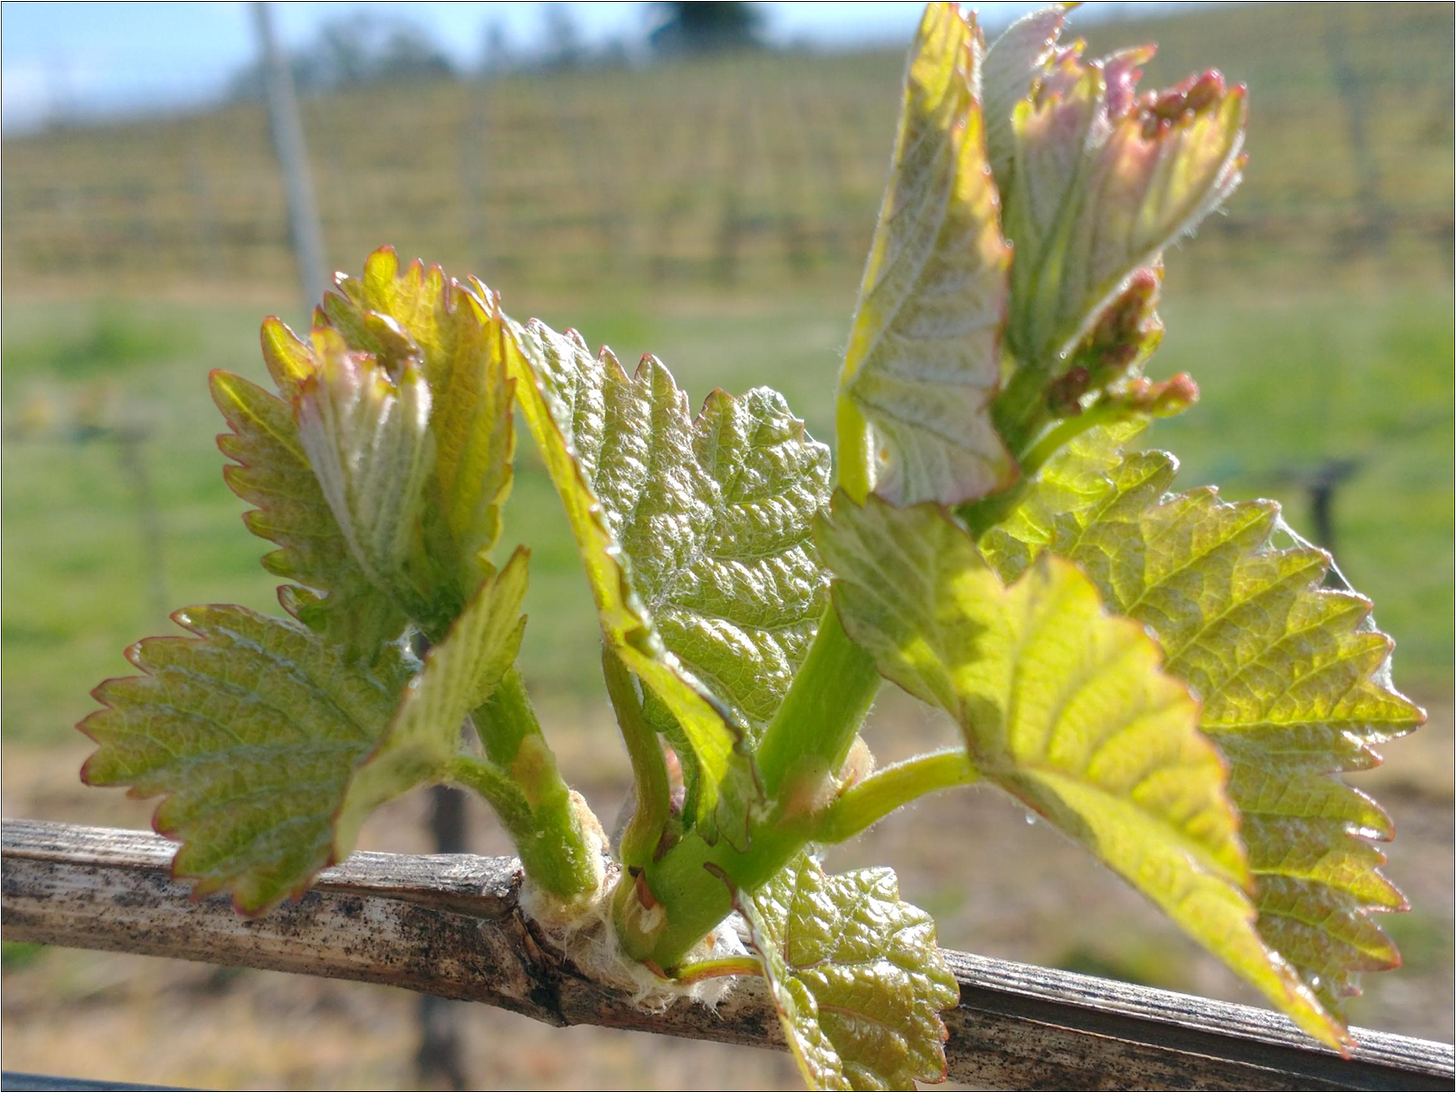 Two Pinot Noir shoots from the same bud. Do you see the "pre-cluster" on the right?